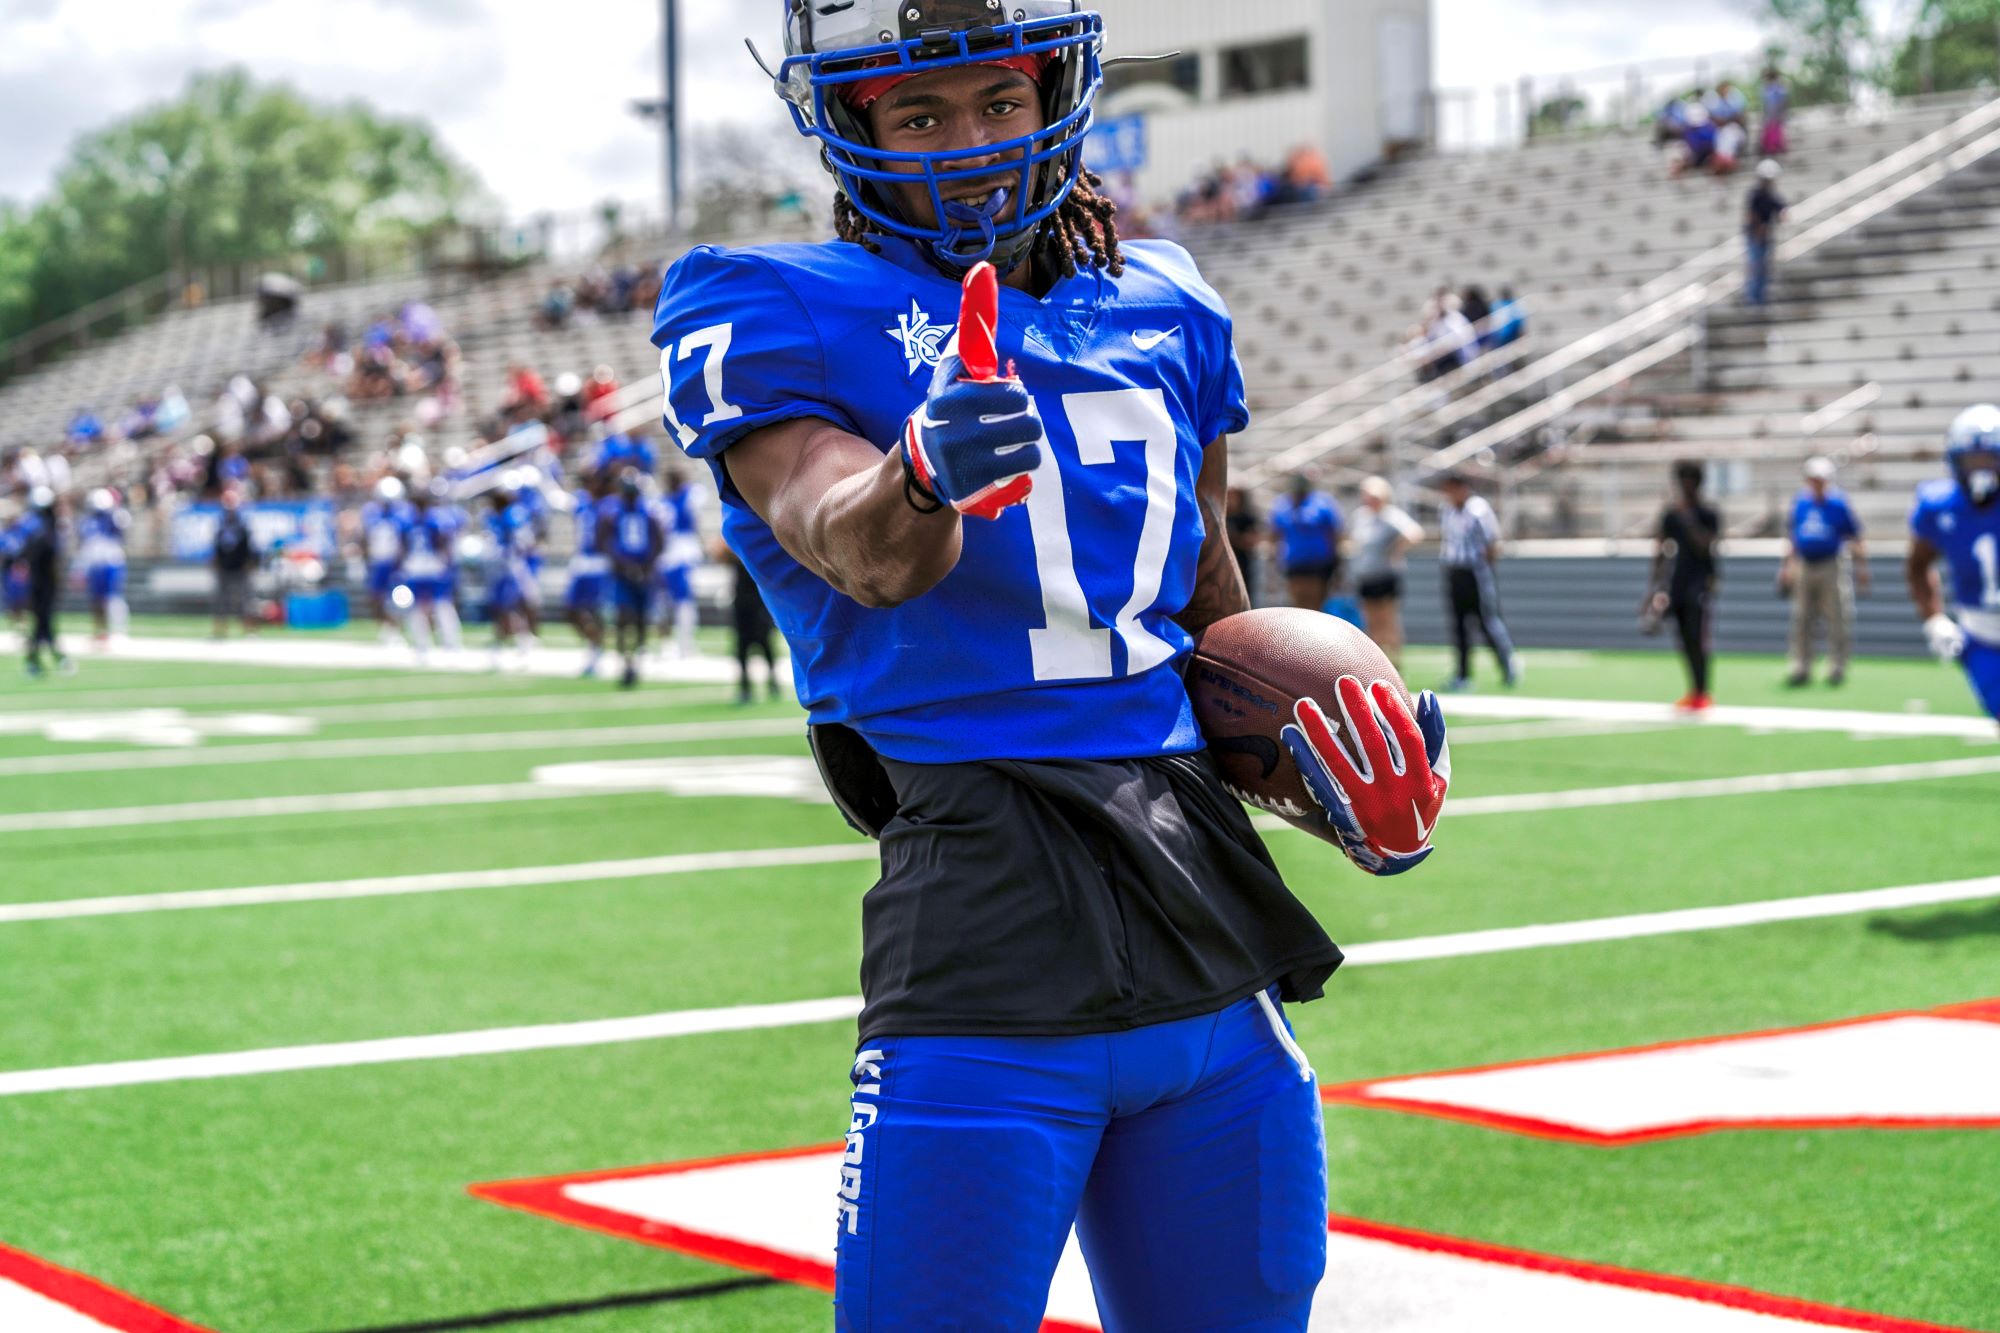 Kilgore College wide receiver Elijah Bean poses for ETBlitz photographer Alex Nabor after catching one of his two touchdowns in the KC Blue vs. White Spring Game on Saturday. (Photo by ALEX NABOR - ETBLITZ.COM)